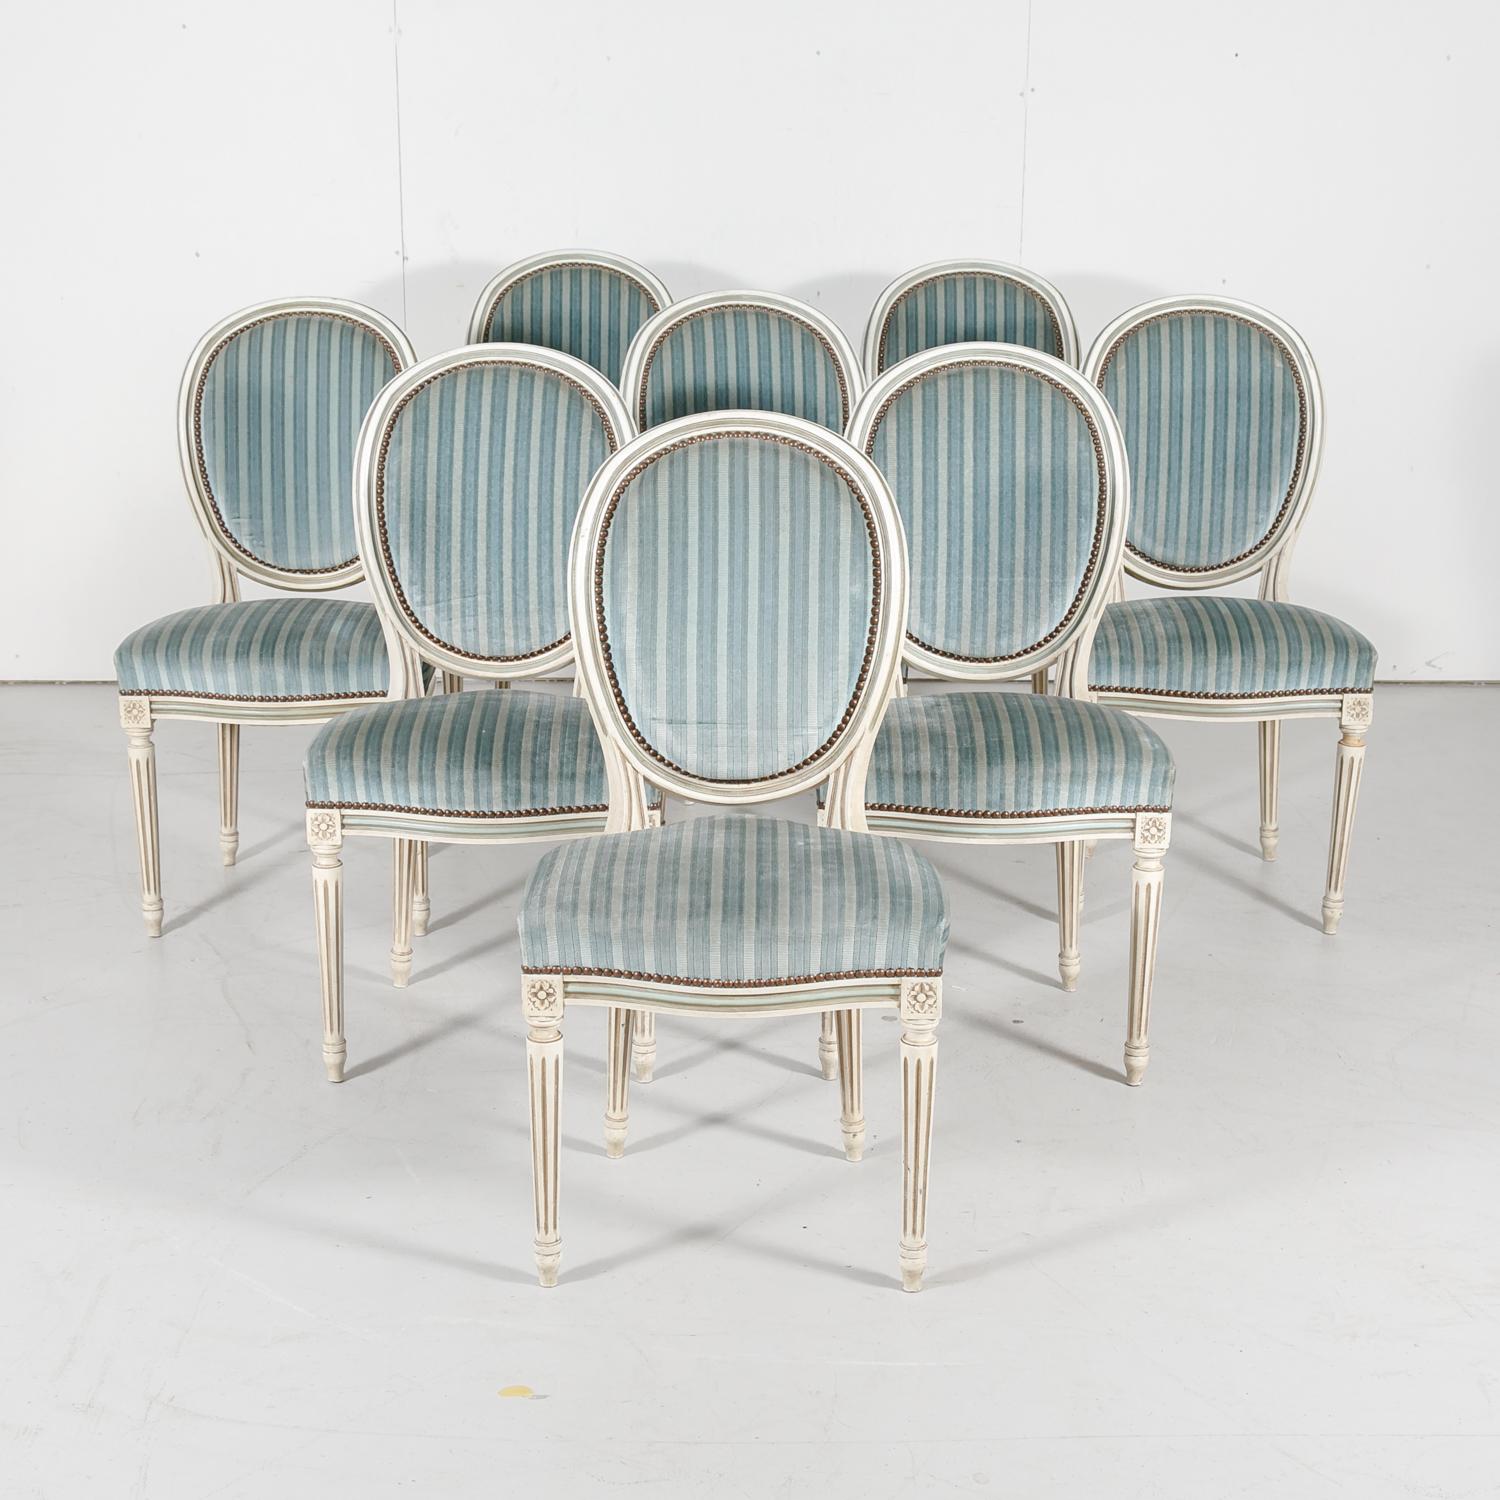 Set of eight French Louis XVI style carved and painted side chairs having the original cream painted finish with accents of French blue and taupe paint, circa 1920s. Upholstered medallion shaped backs and serpentine seats with nail head trim, all